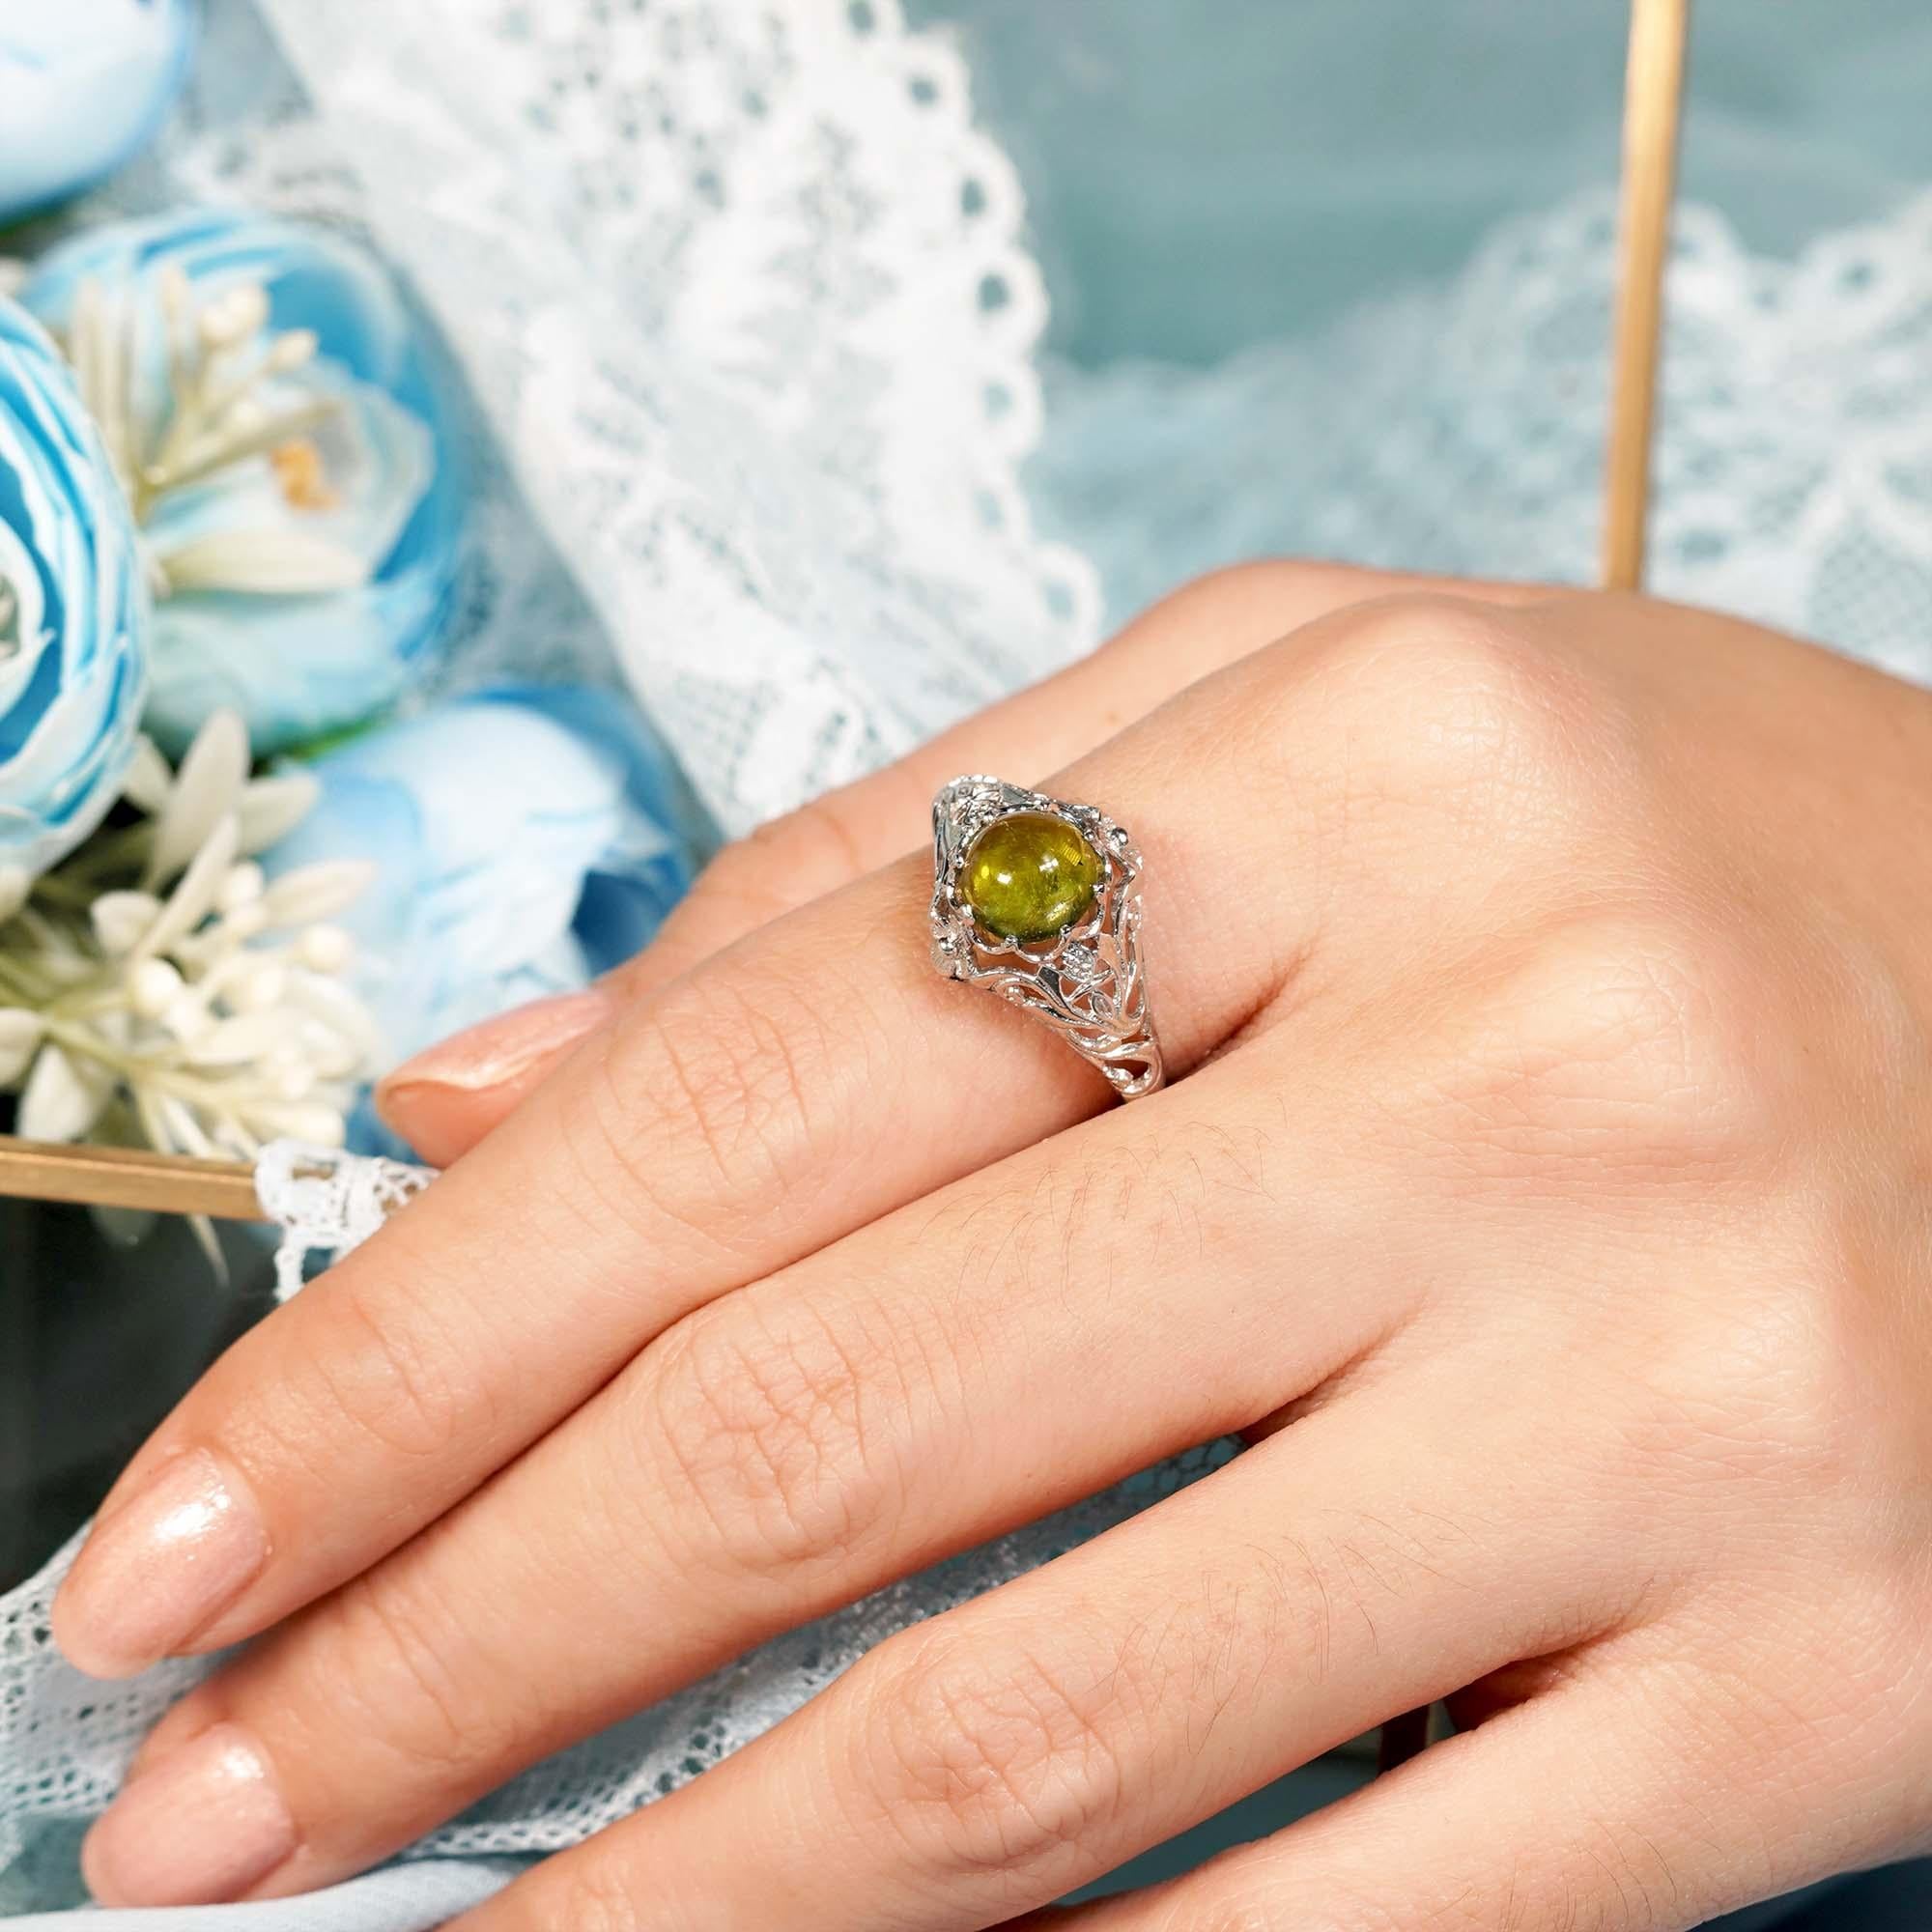 For Sale:  Natural Cabochon Peridot Vintage Style Filigree Ring in Solid 9K White Gold 7